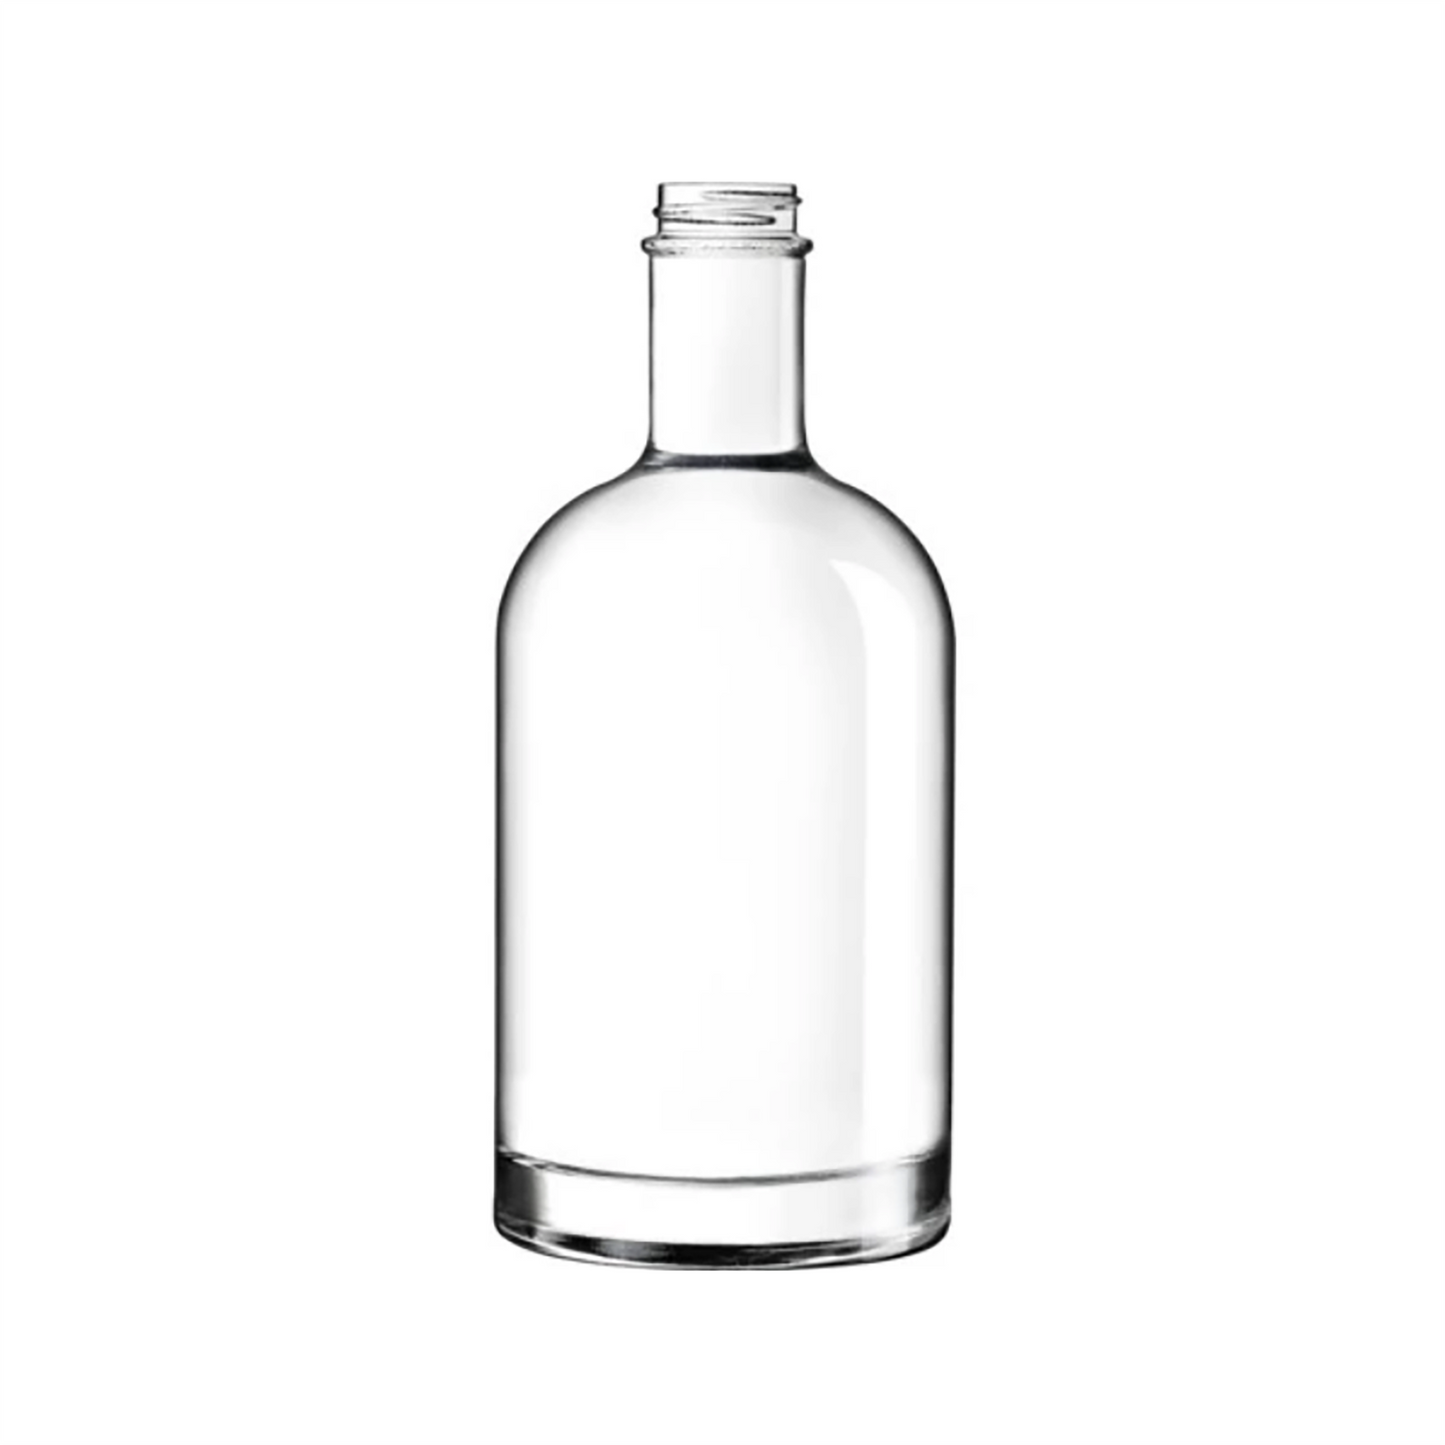 clear glass oslo spirit bottle with screw top